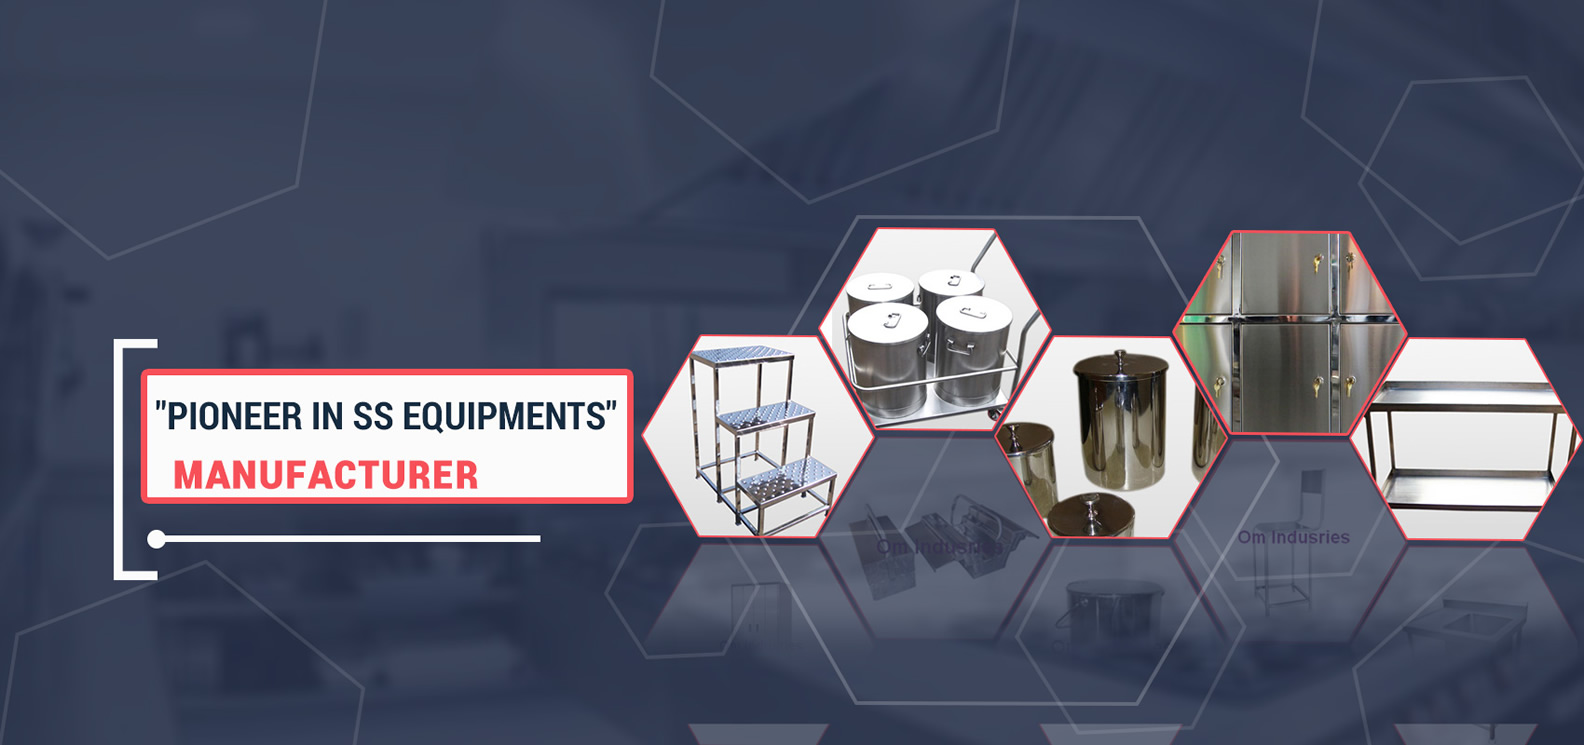 SS Equipments Manufacturer in Saratov